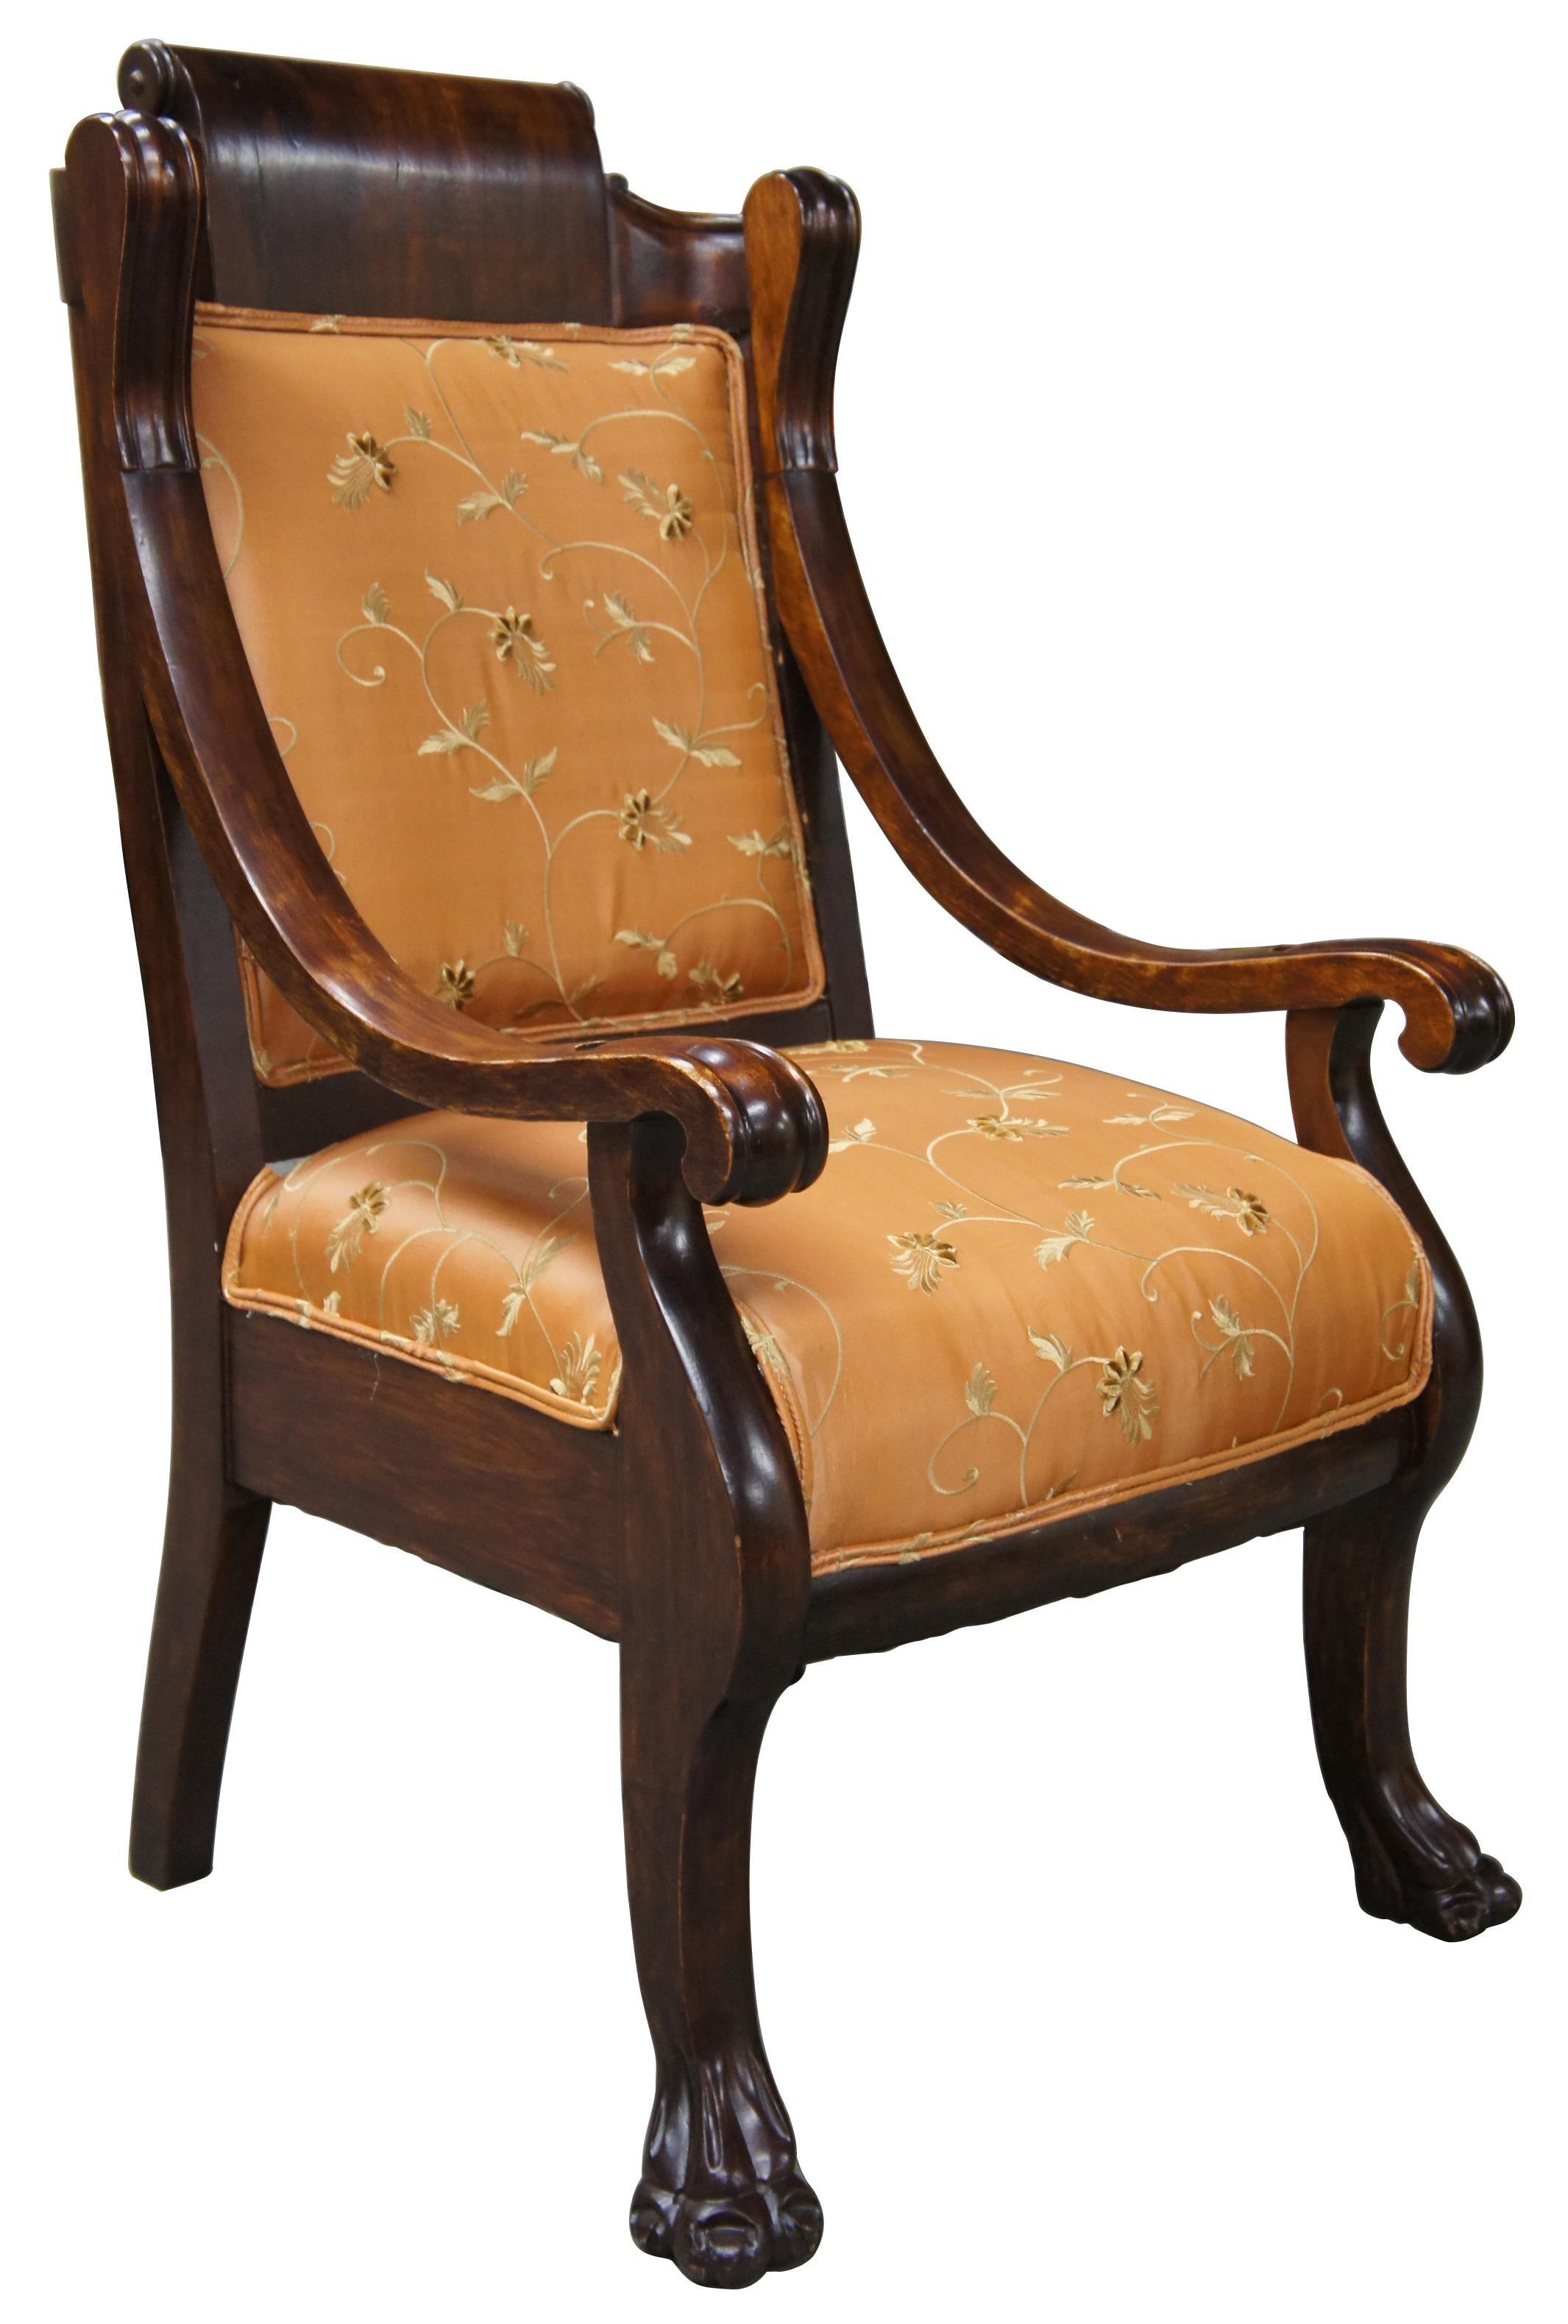 Victorian era parlor armchair drawing inspiration from American Empire styling. Made from mahogany with sloped arms over a peach silk floral upholstery. Chair rests upon paw feet, castors could be added.

 